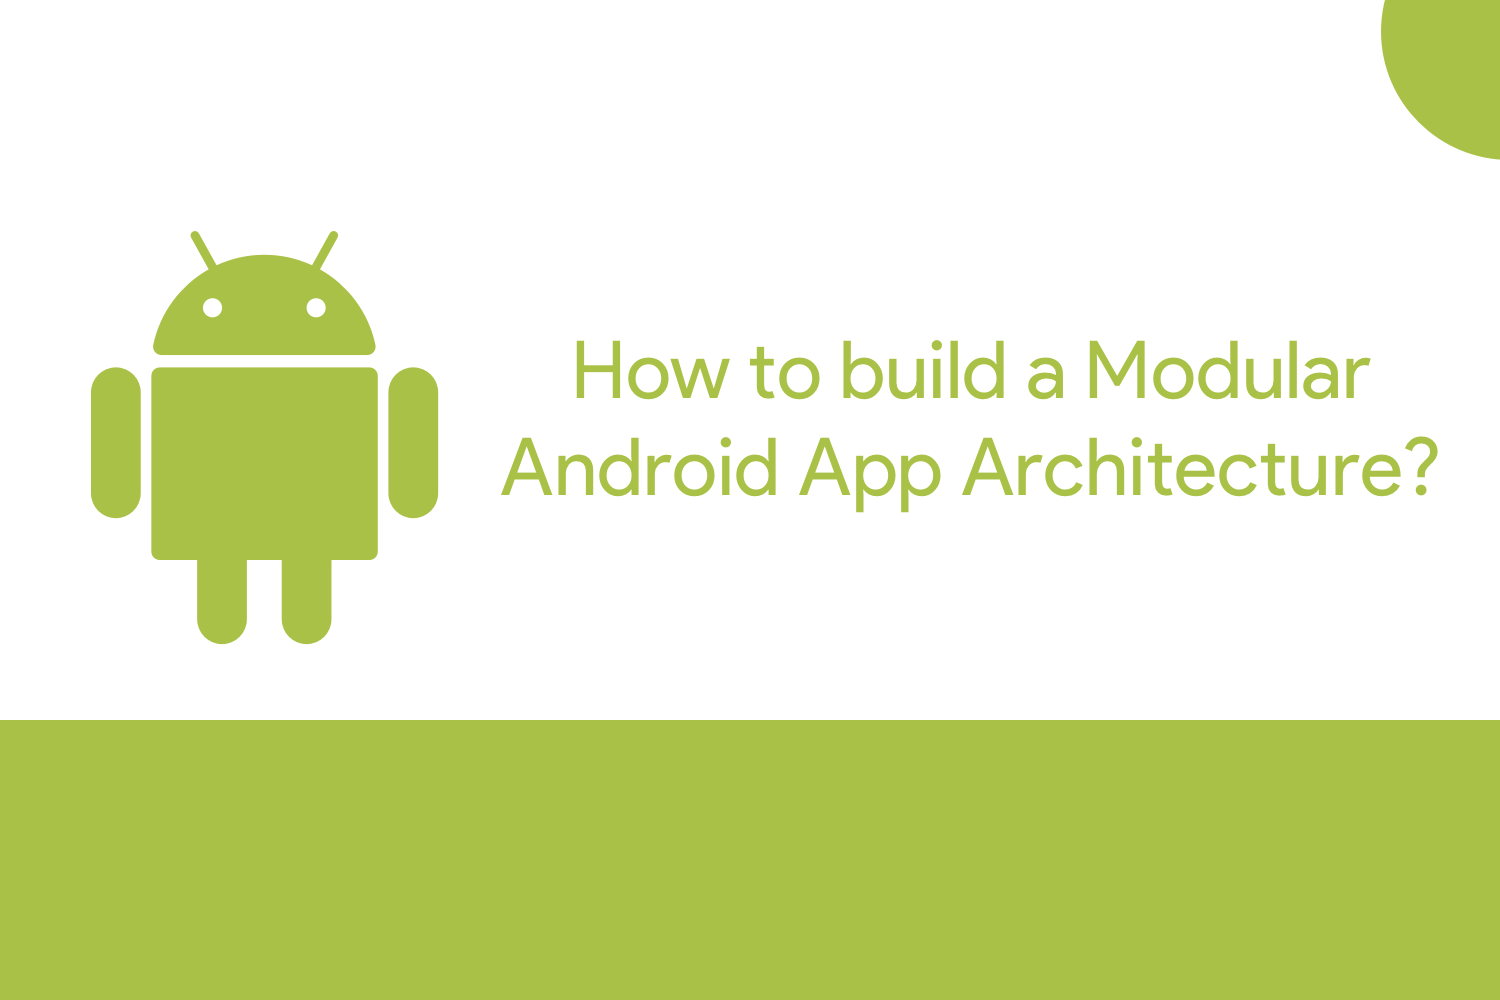 How to build a Modular Android App Architecture?